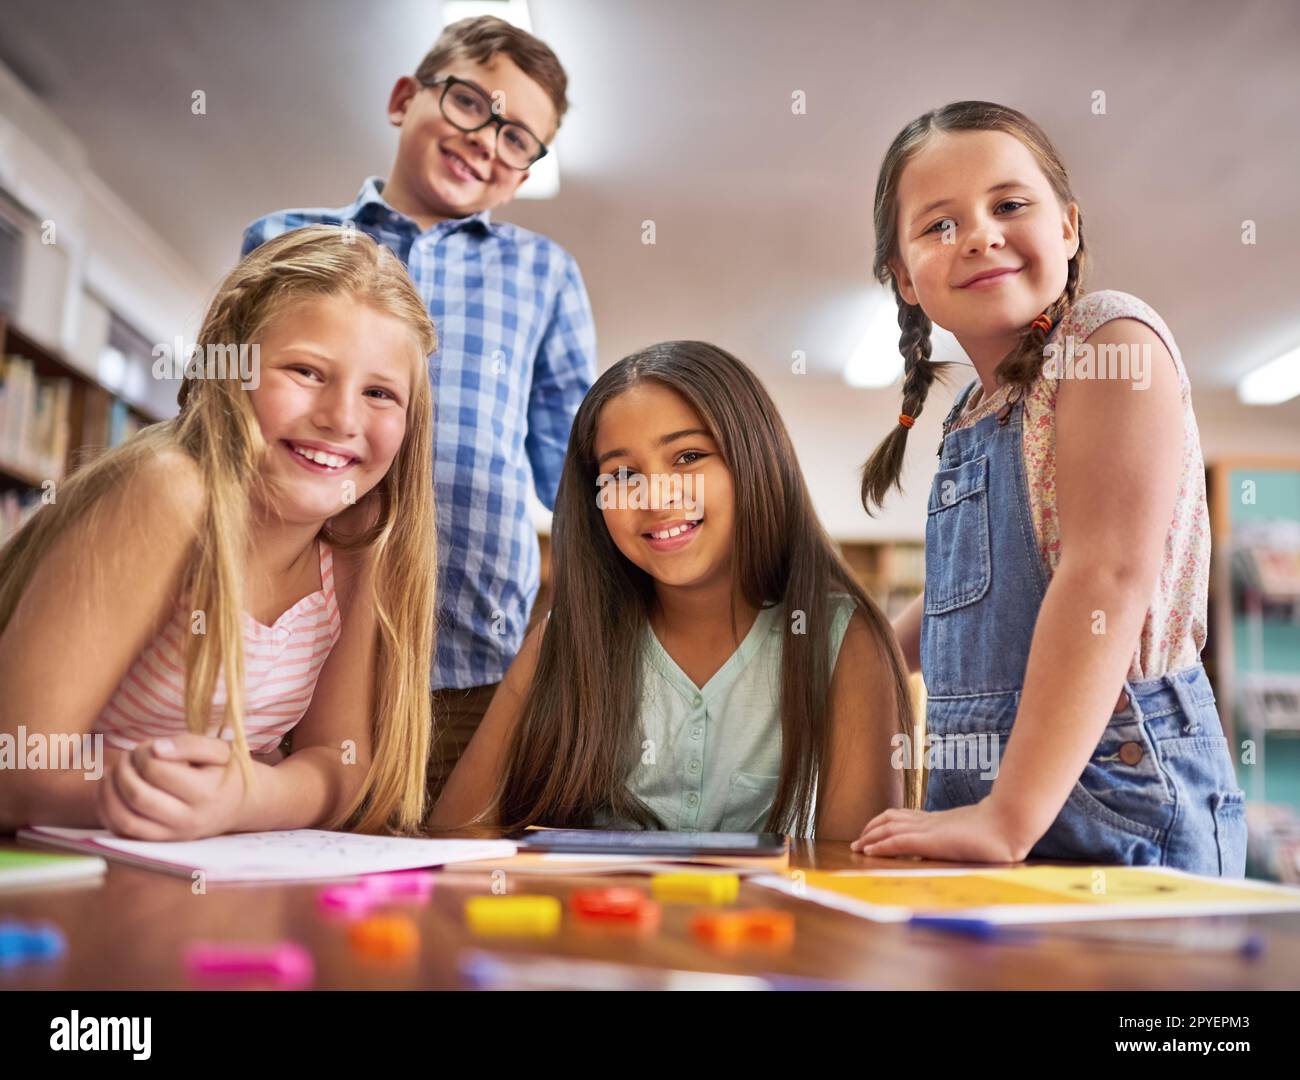 We love learning together. Portrait of a group of young children at school. Stock Photo